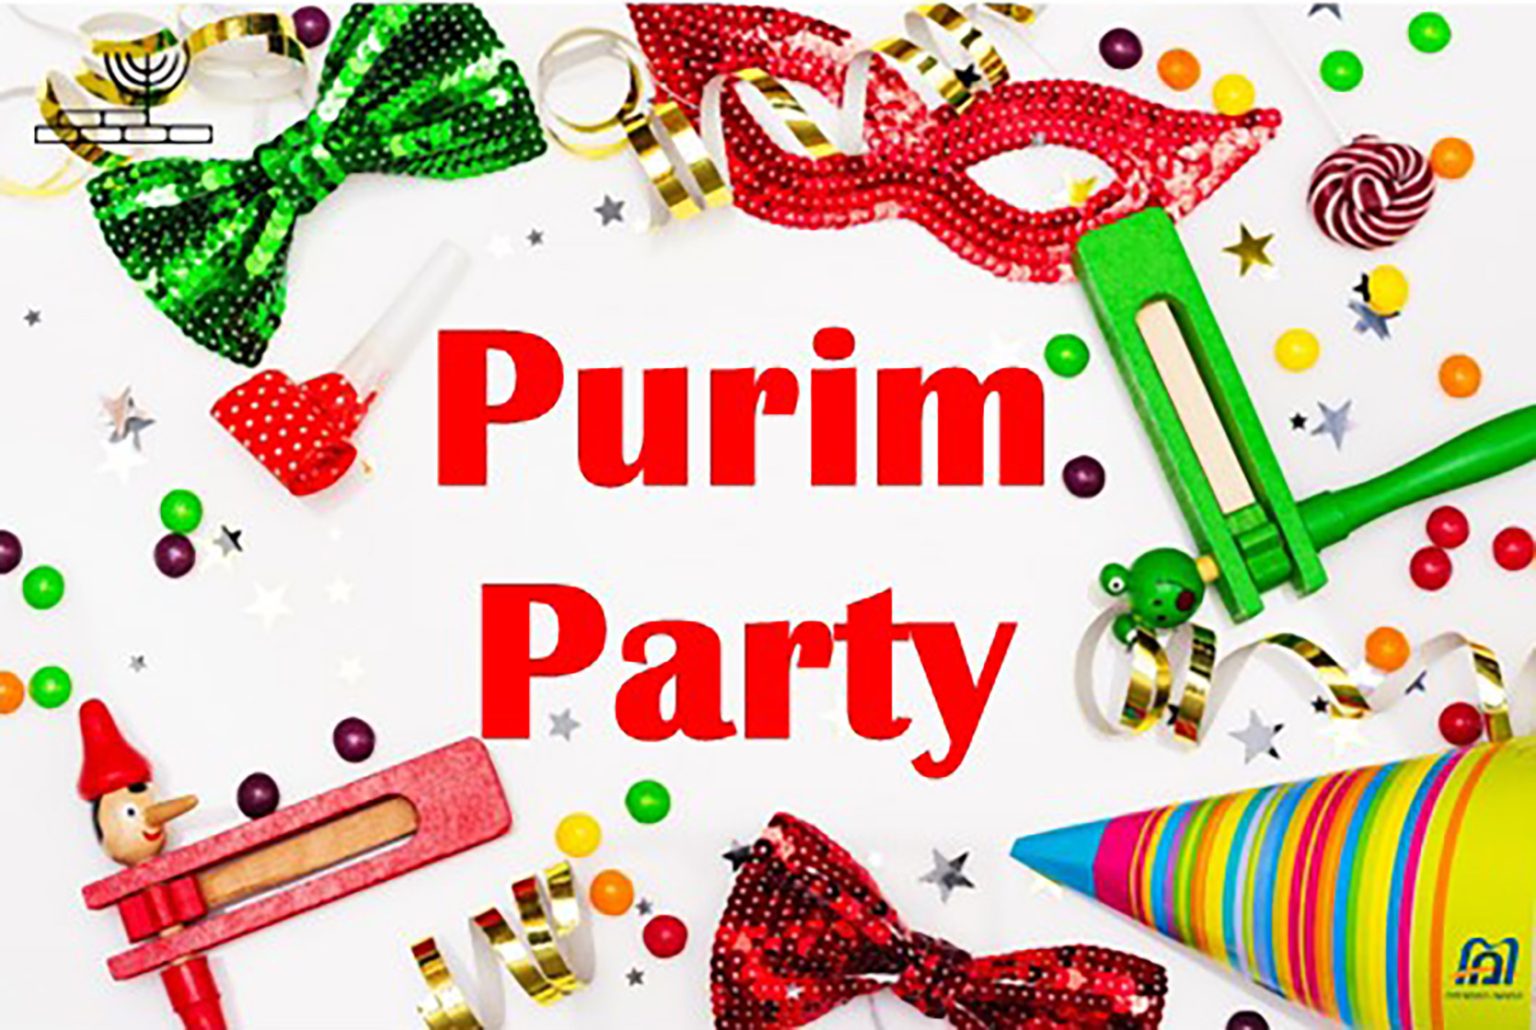 Masks, gragers and the words "Purim party"